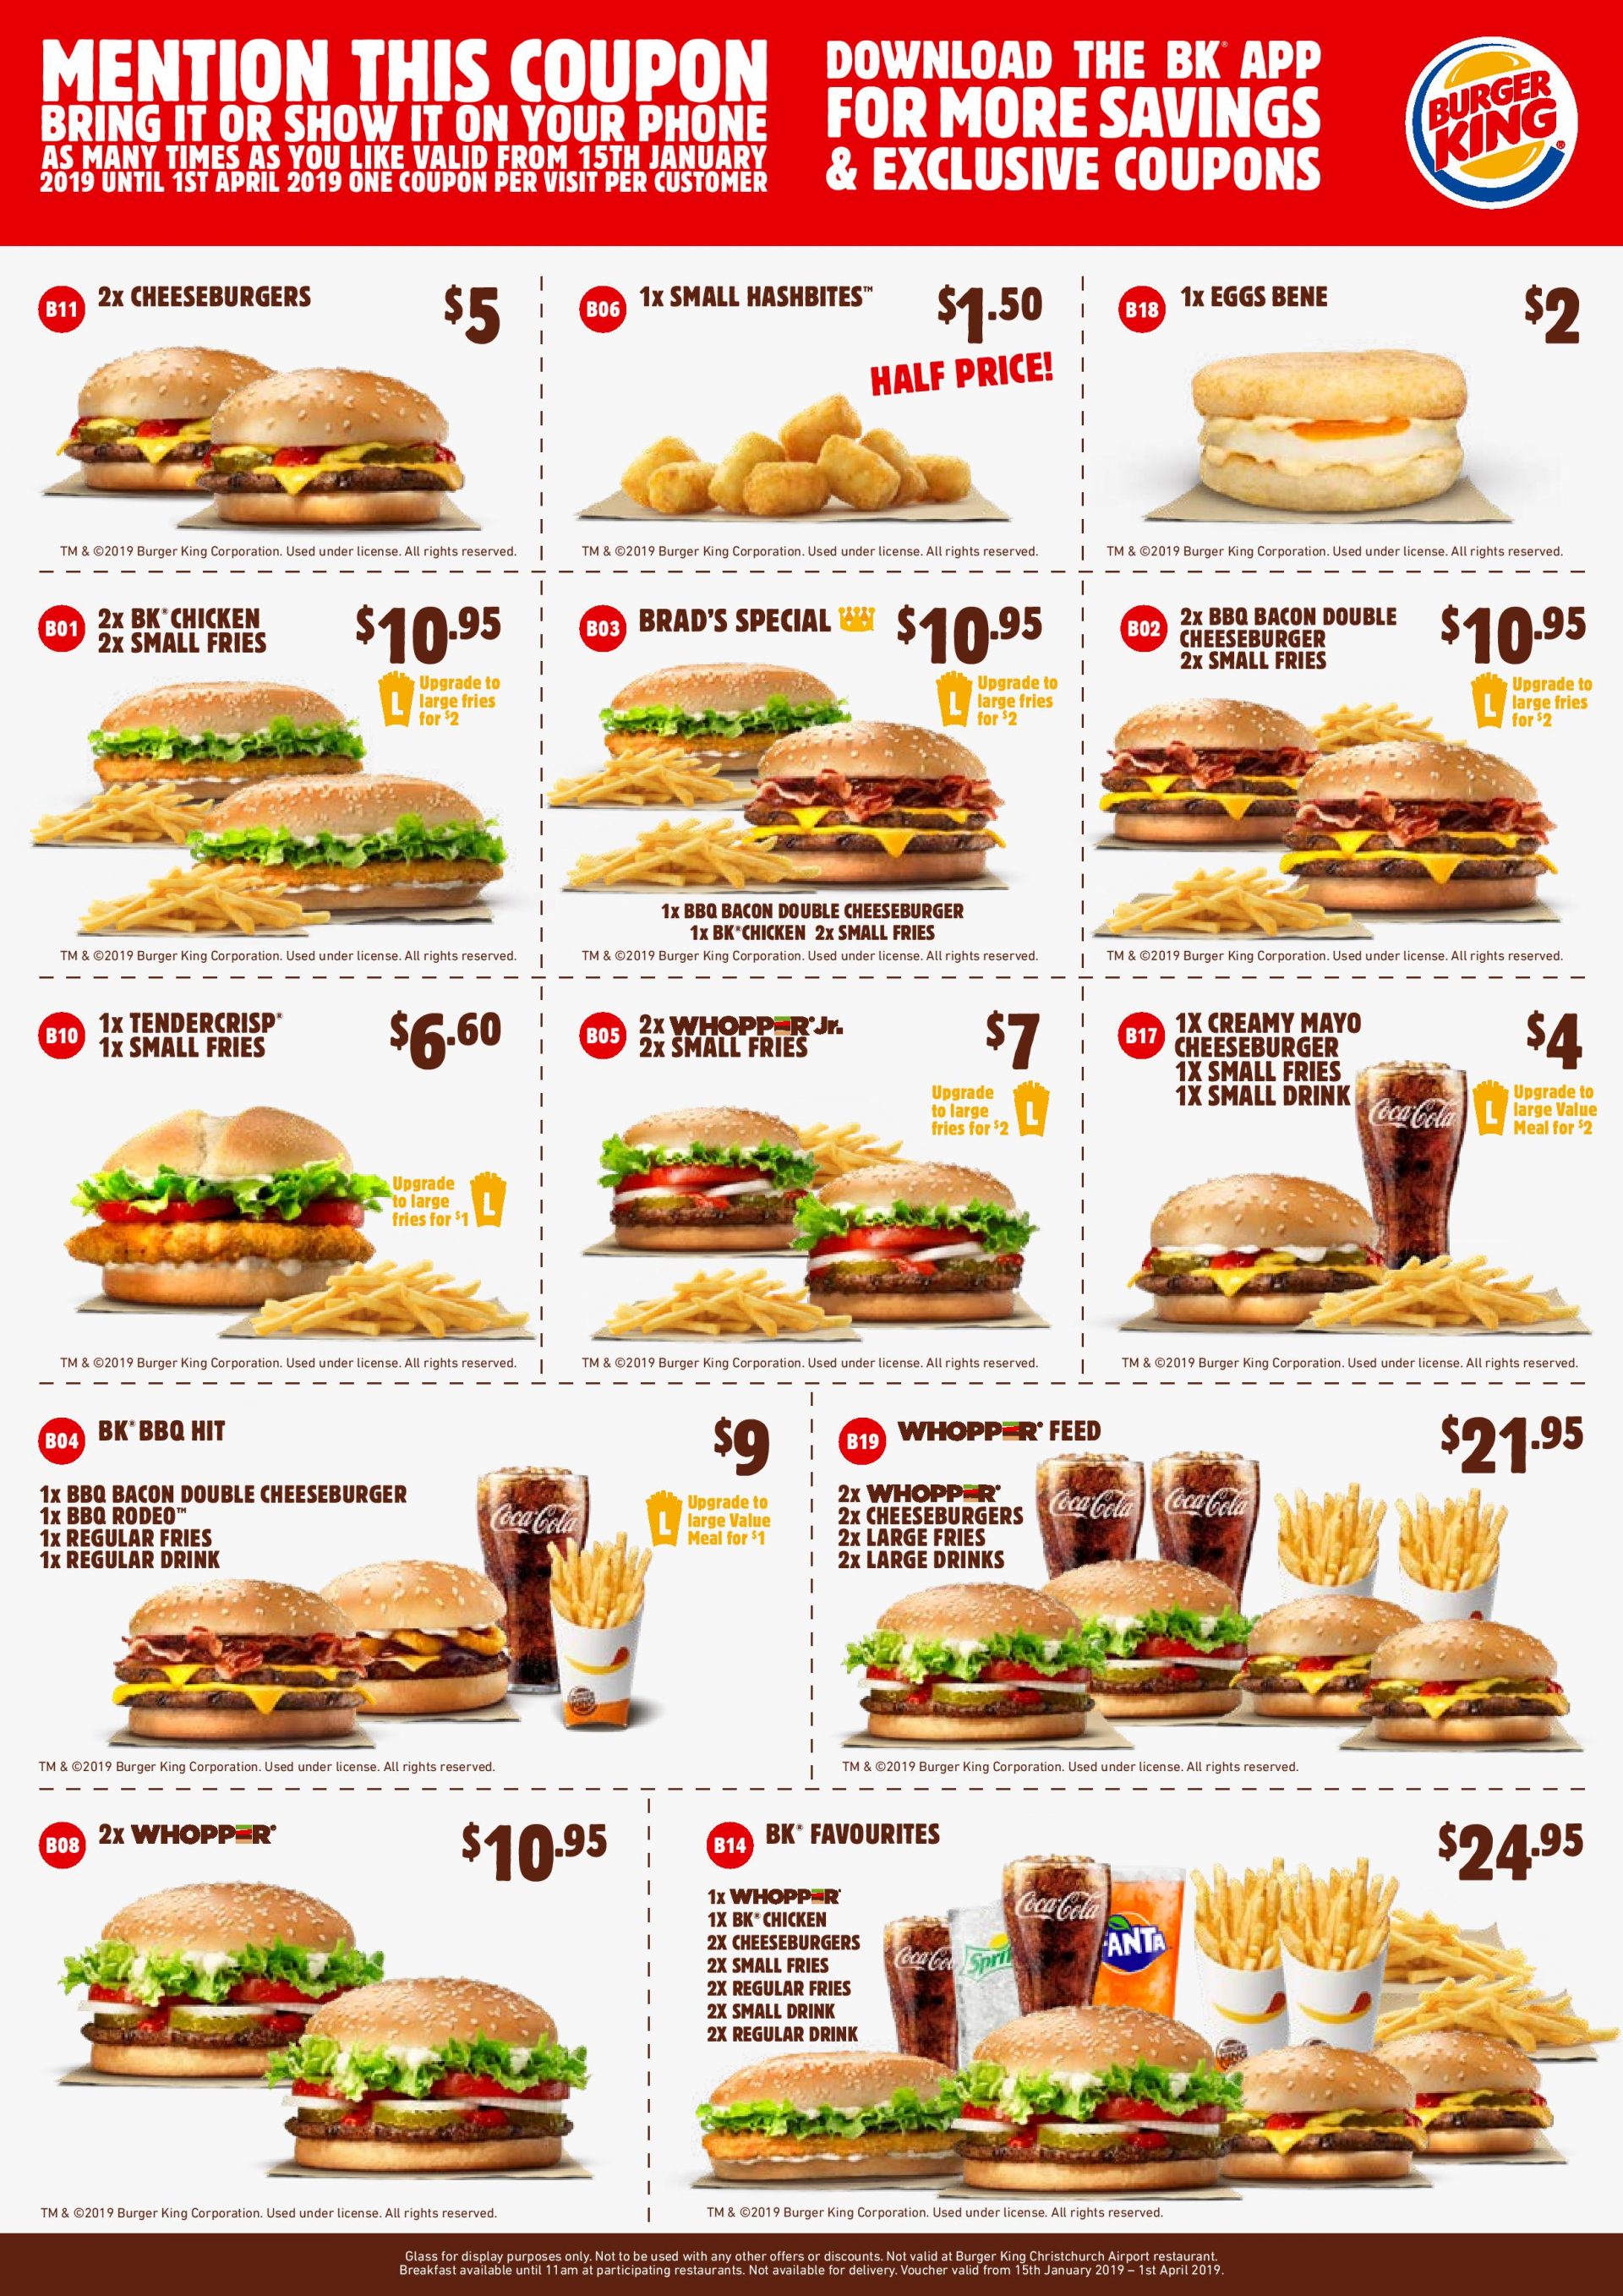 Burger King offers and Restaurants in your city and surrounding area